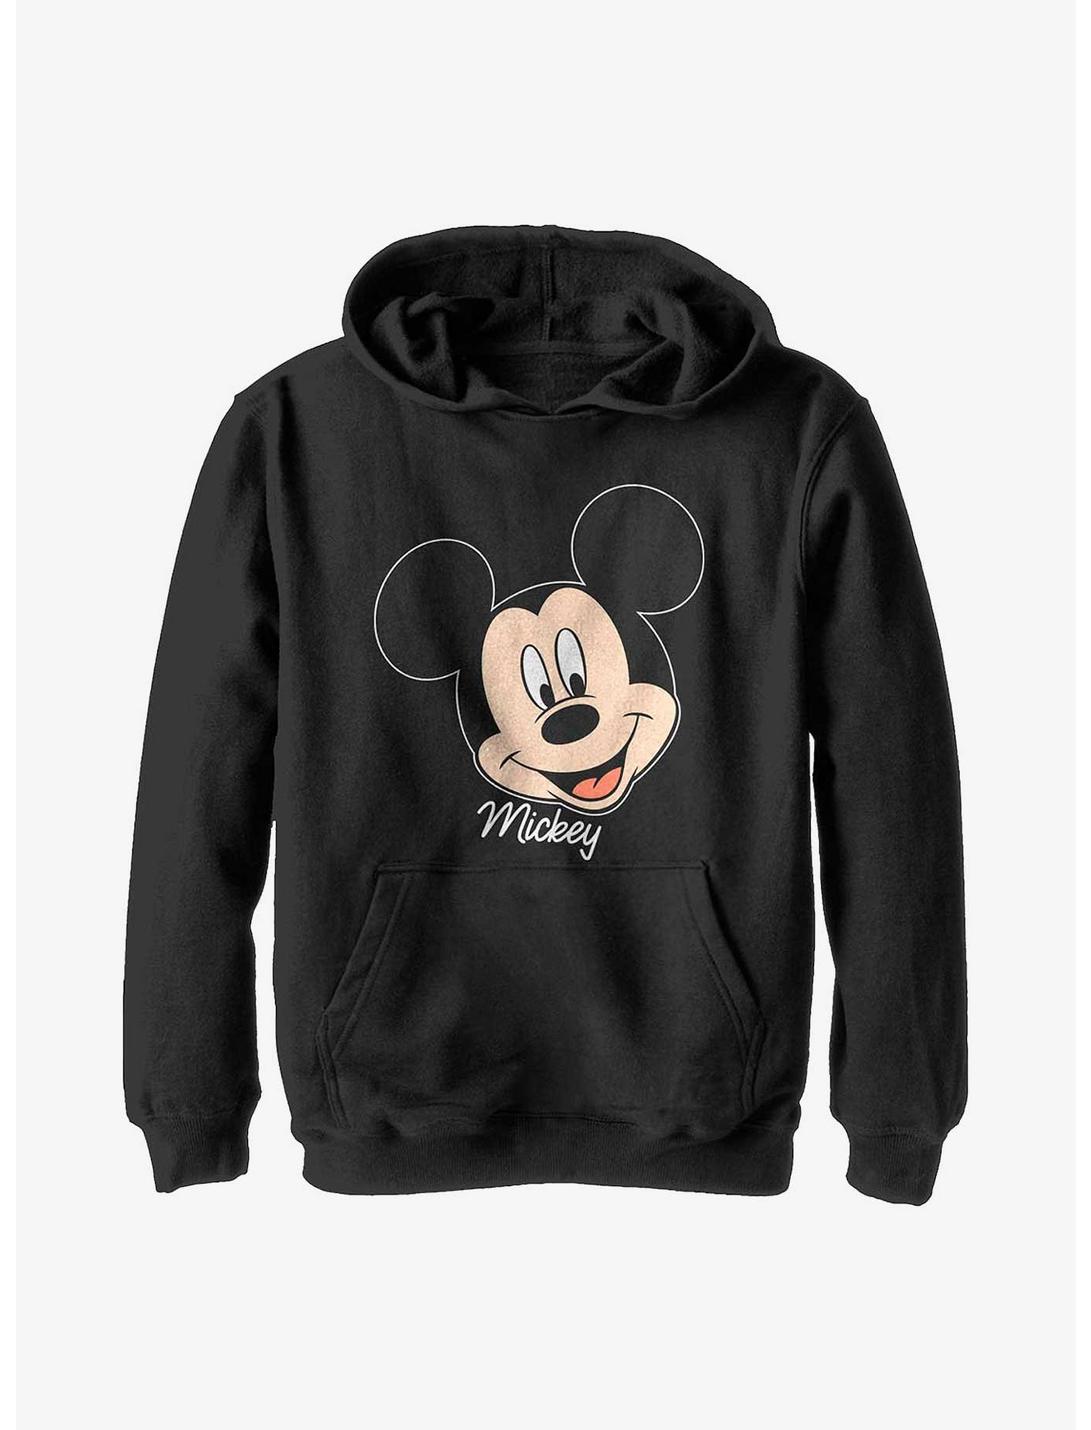 Disney Mickey Mouse Big Face Youth Hoodie, BLACK, hi-res